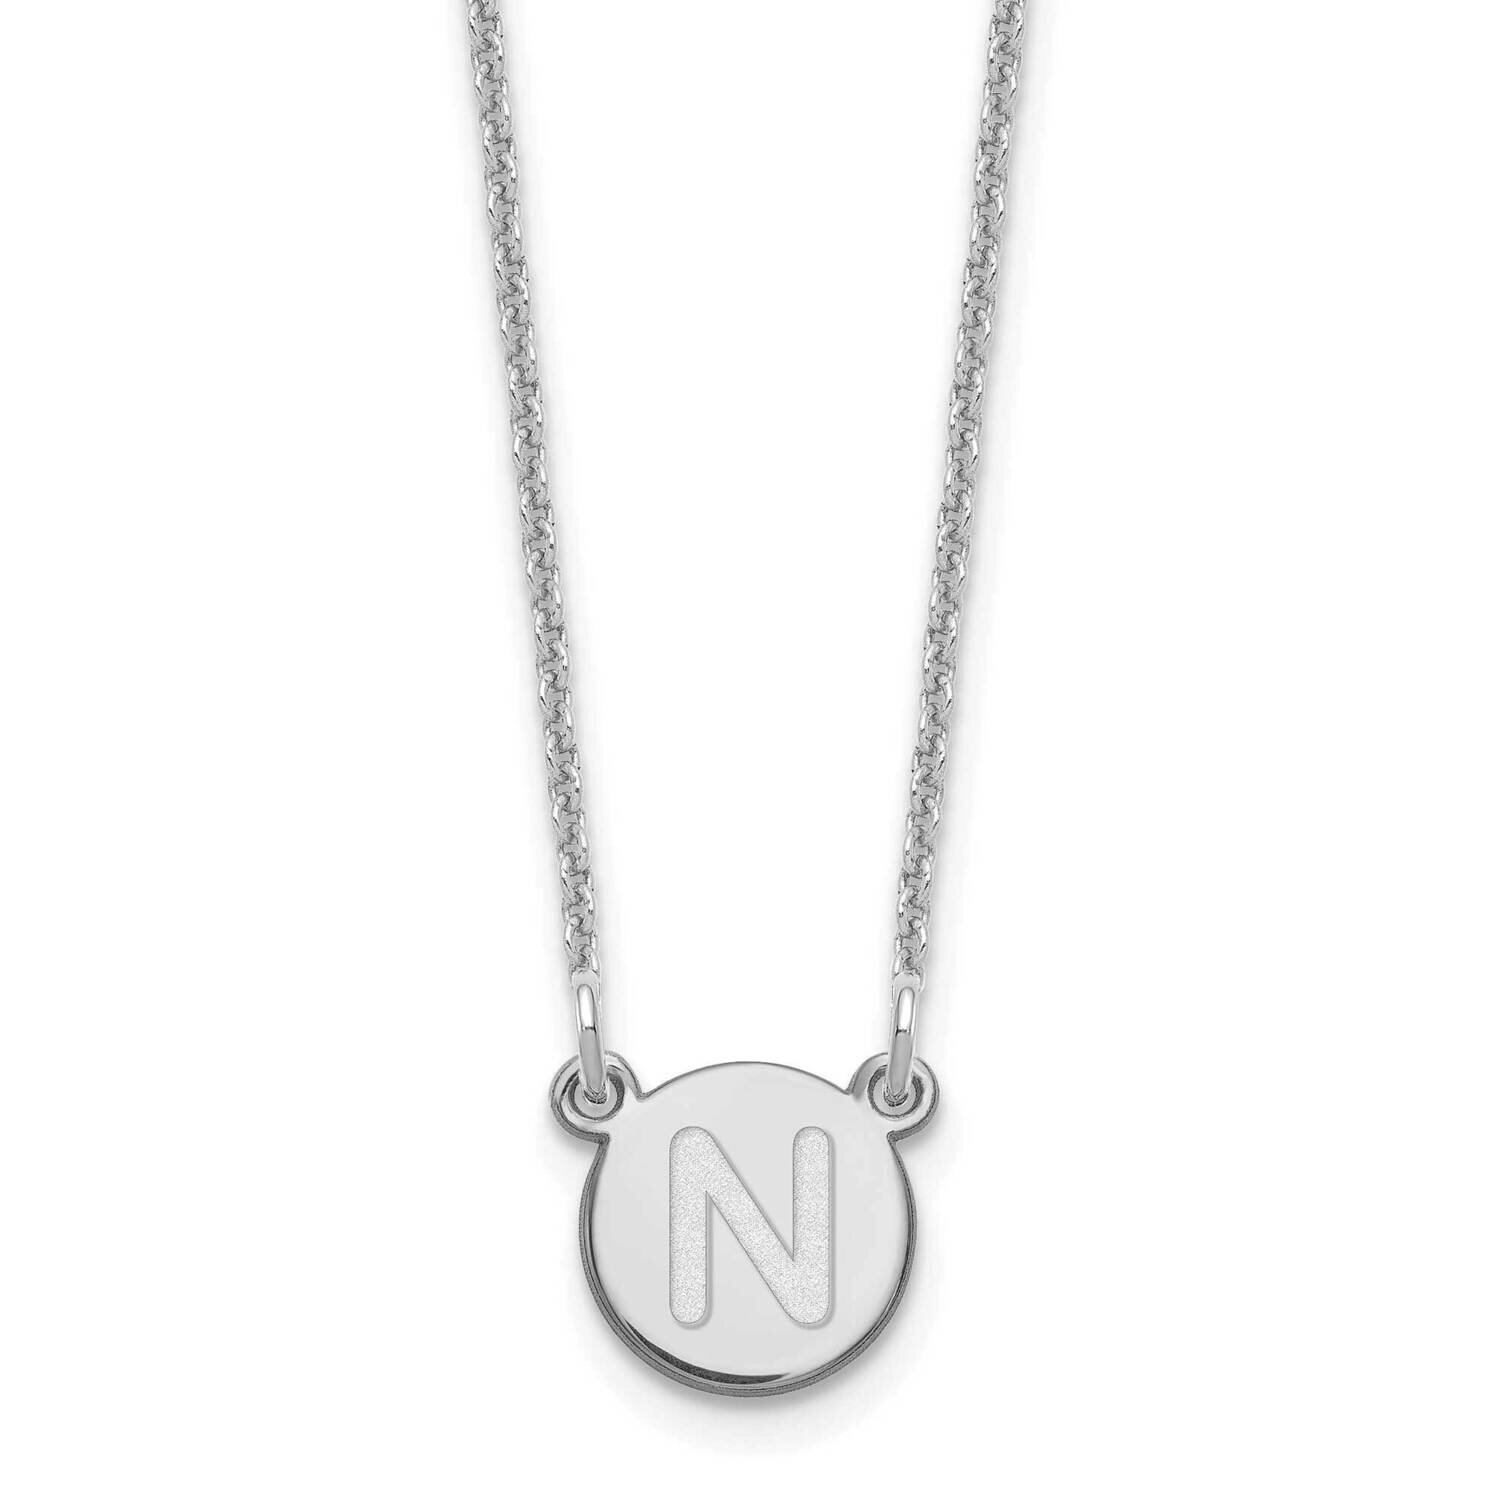 Tiny Circle Block Initial Letter N Necklace 14k White Gold XNA722W/N